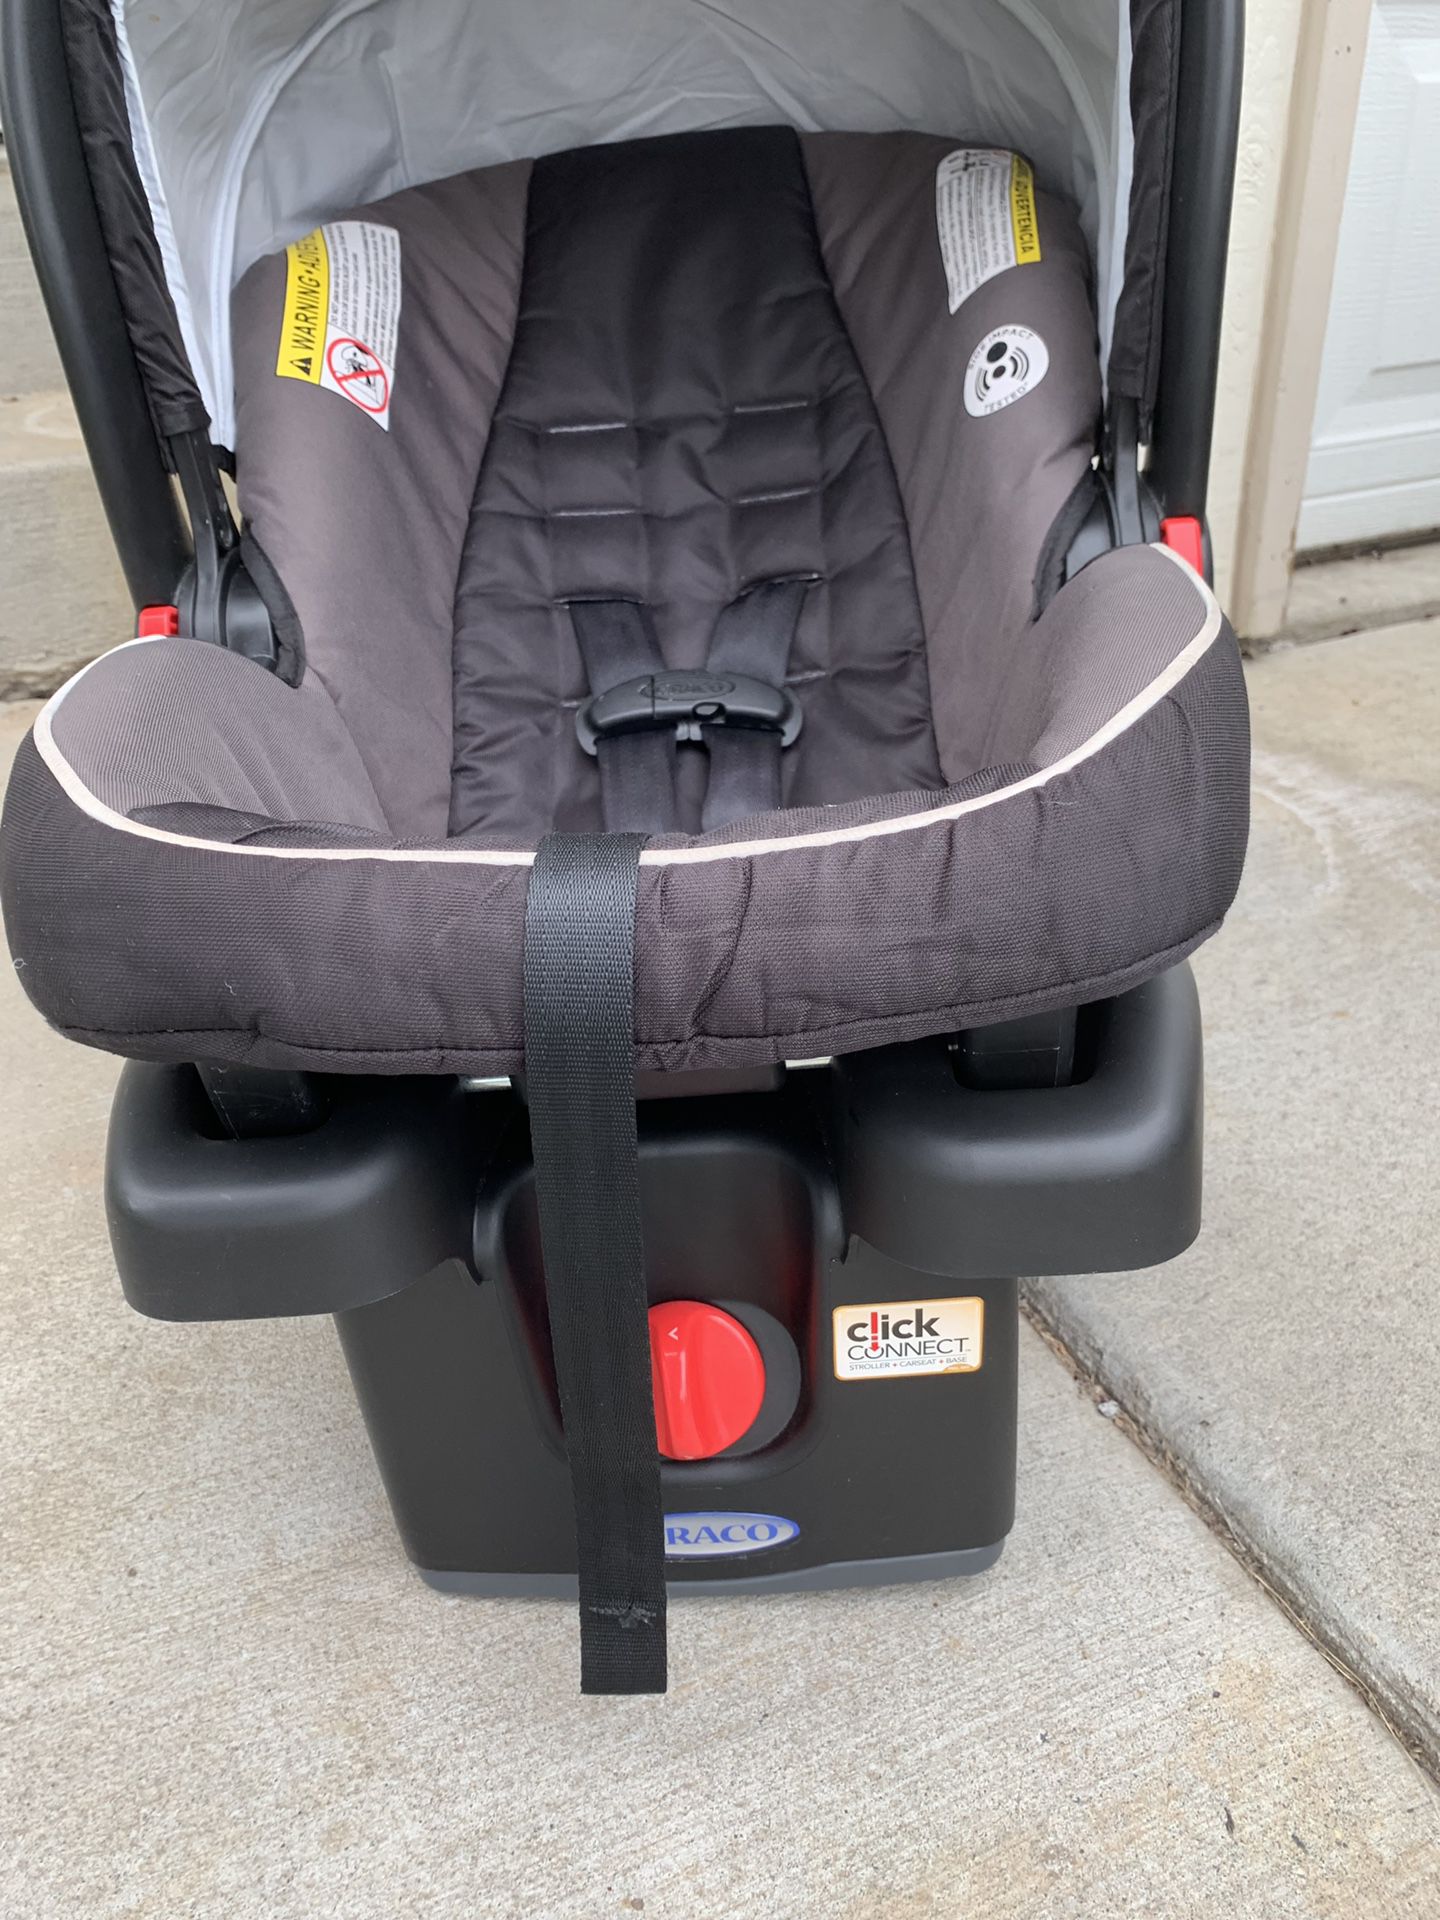 Graco infant one click car seat